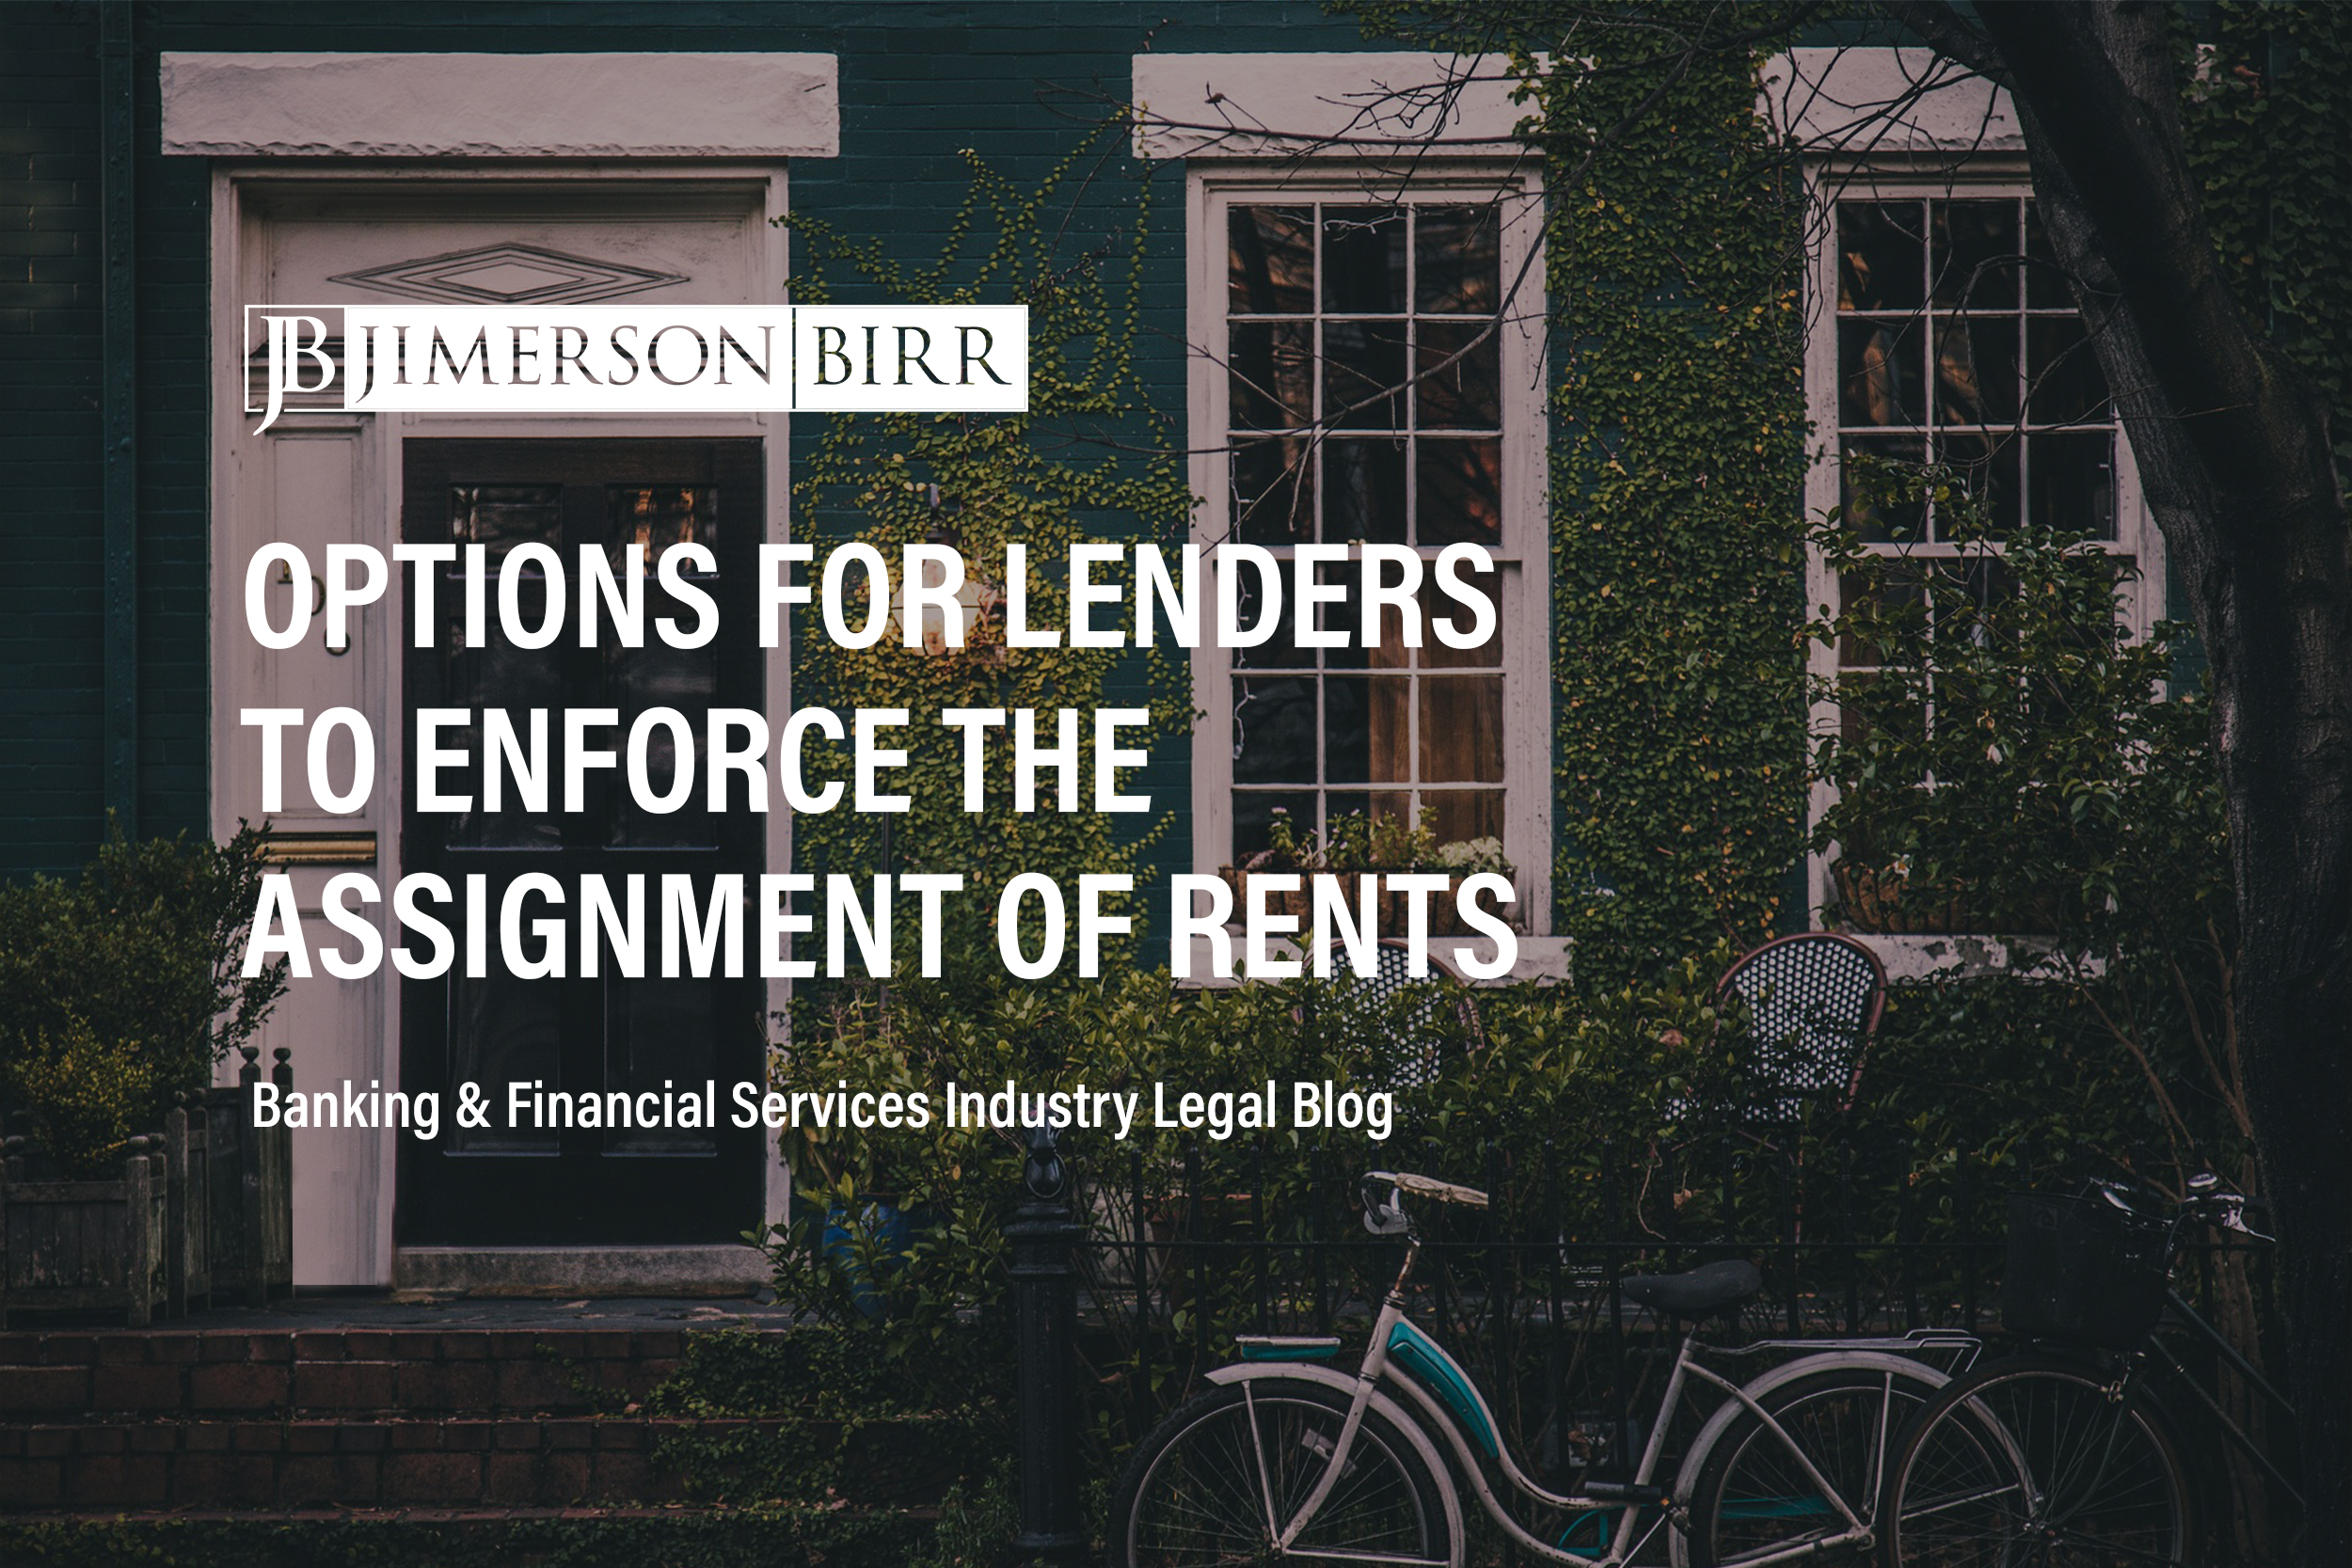 Properly Enforcing an Assignment of Rents